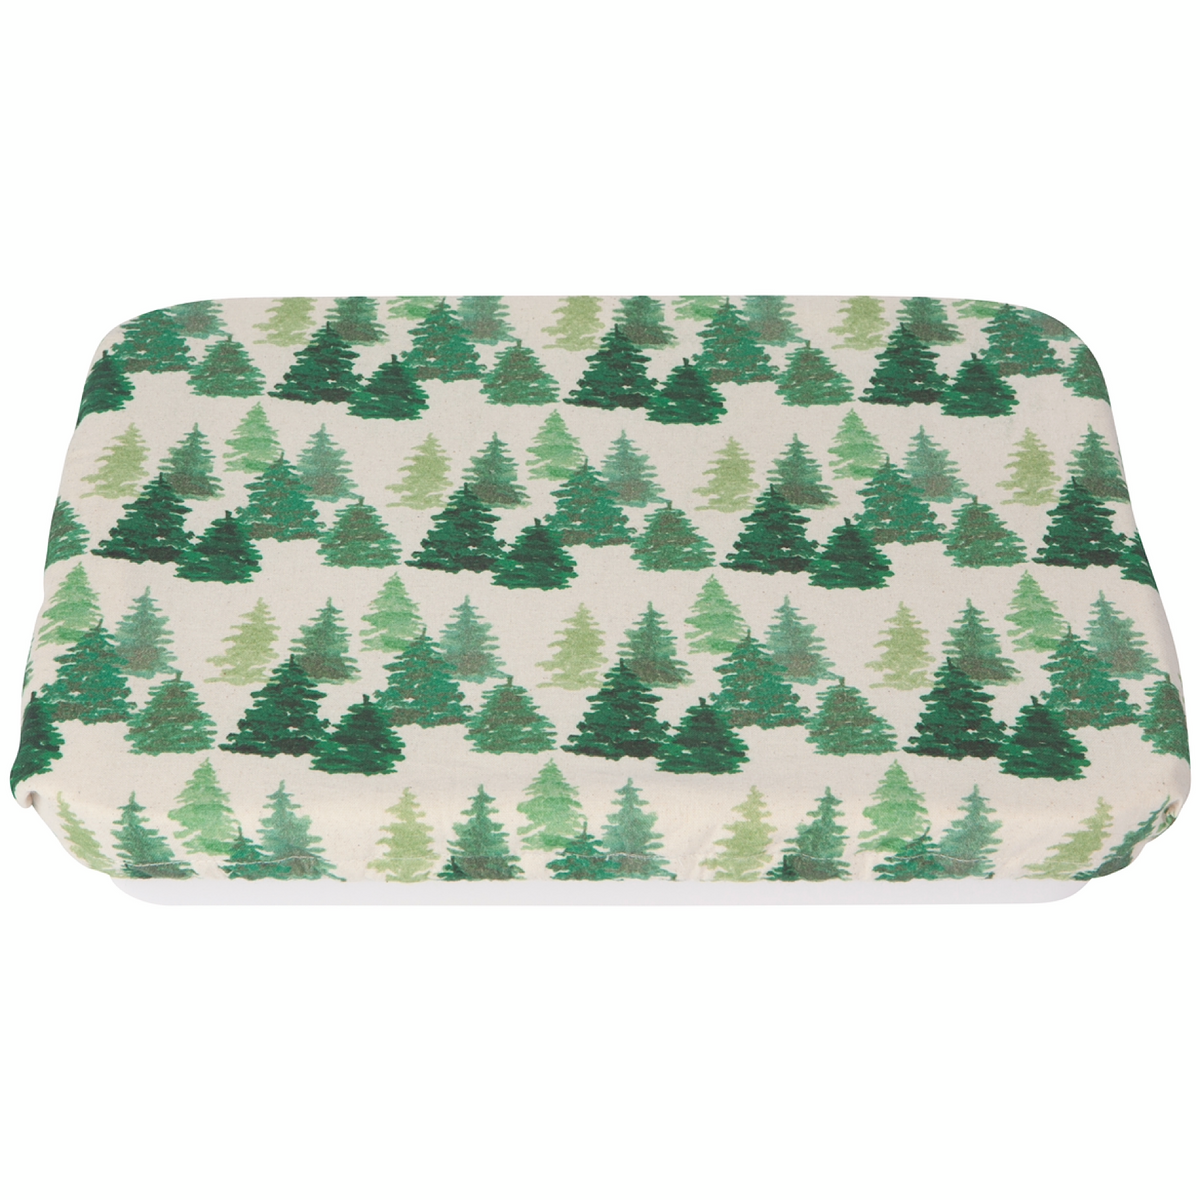 Woods Baking Dish Cover